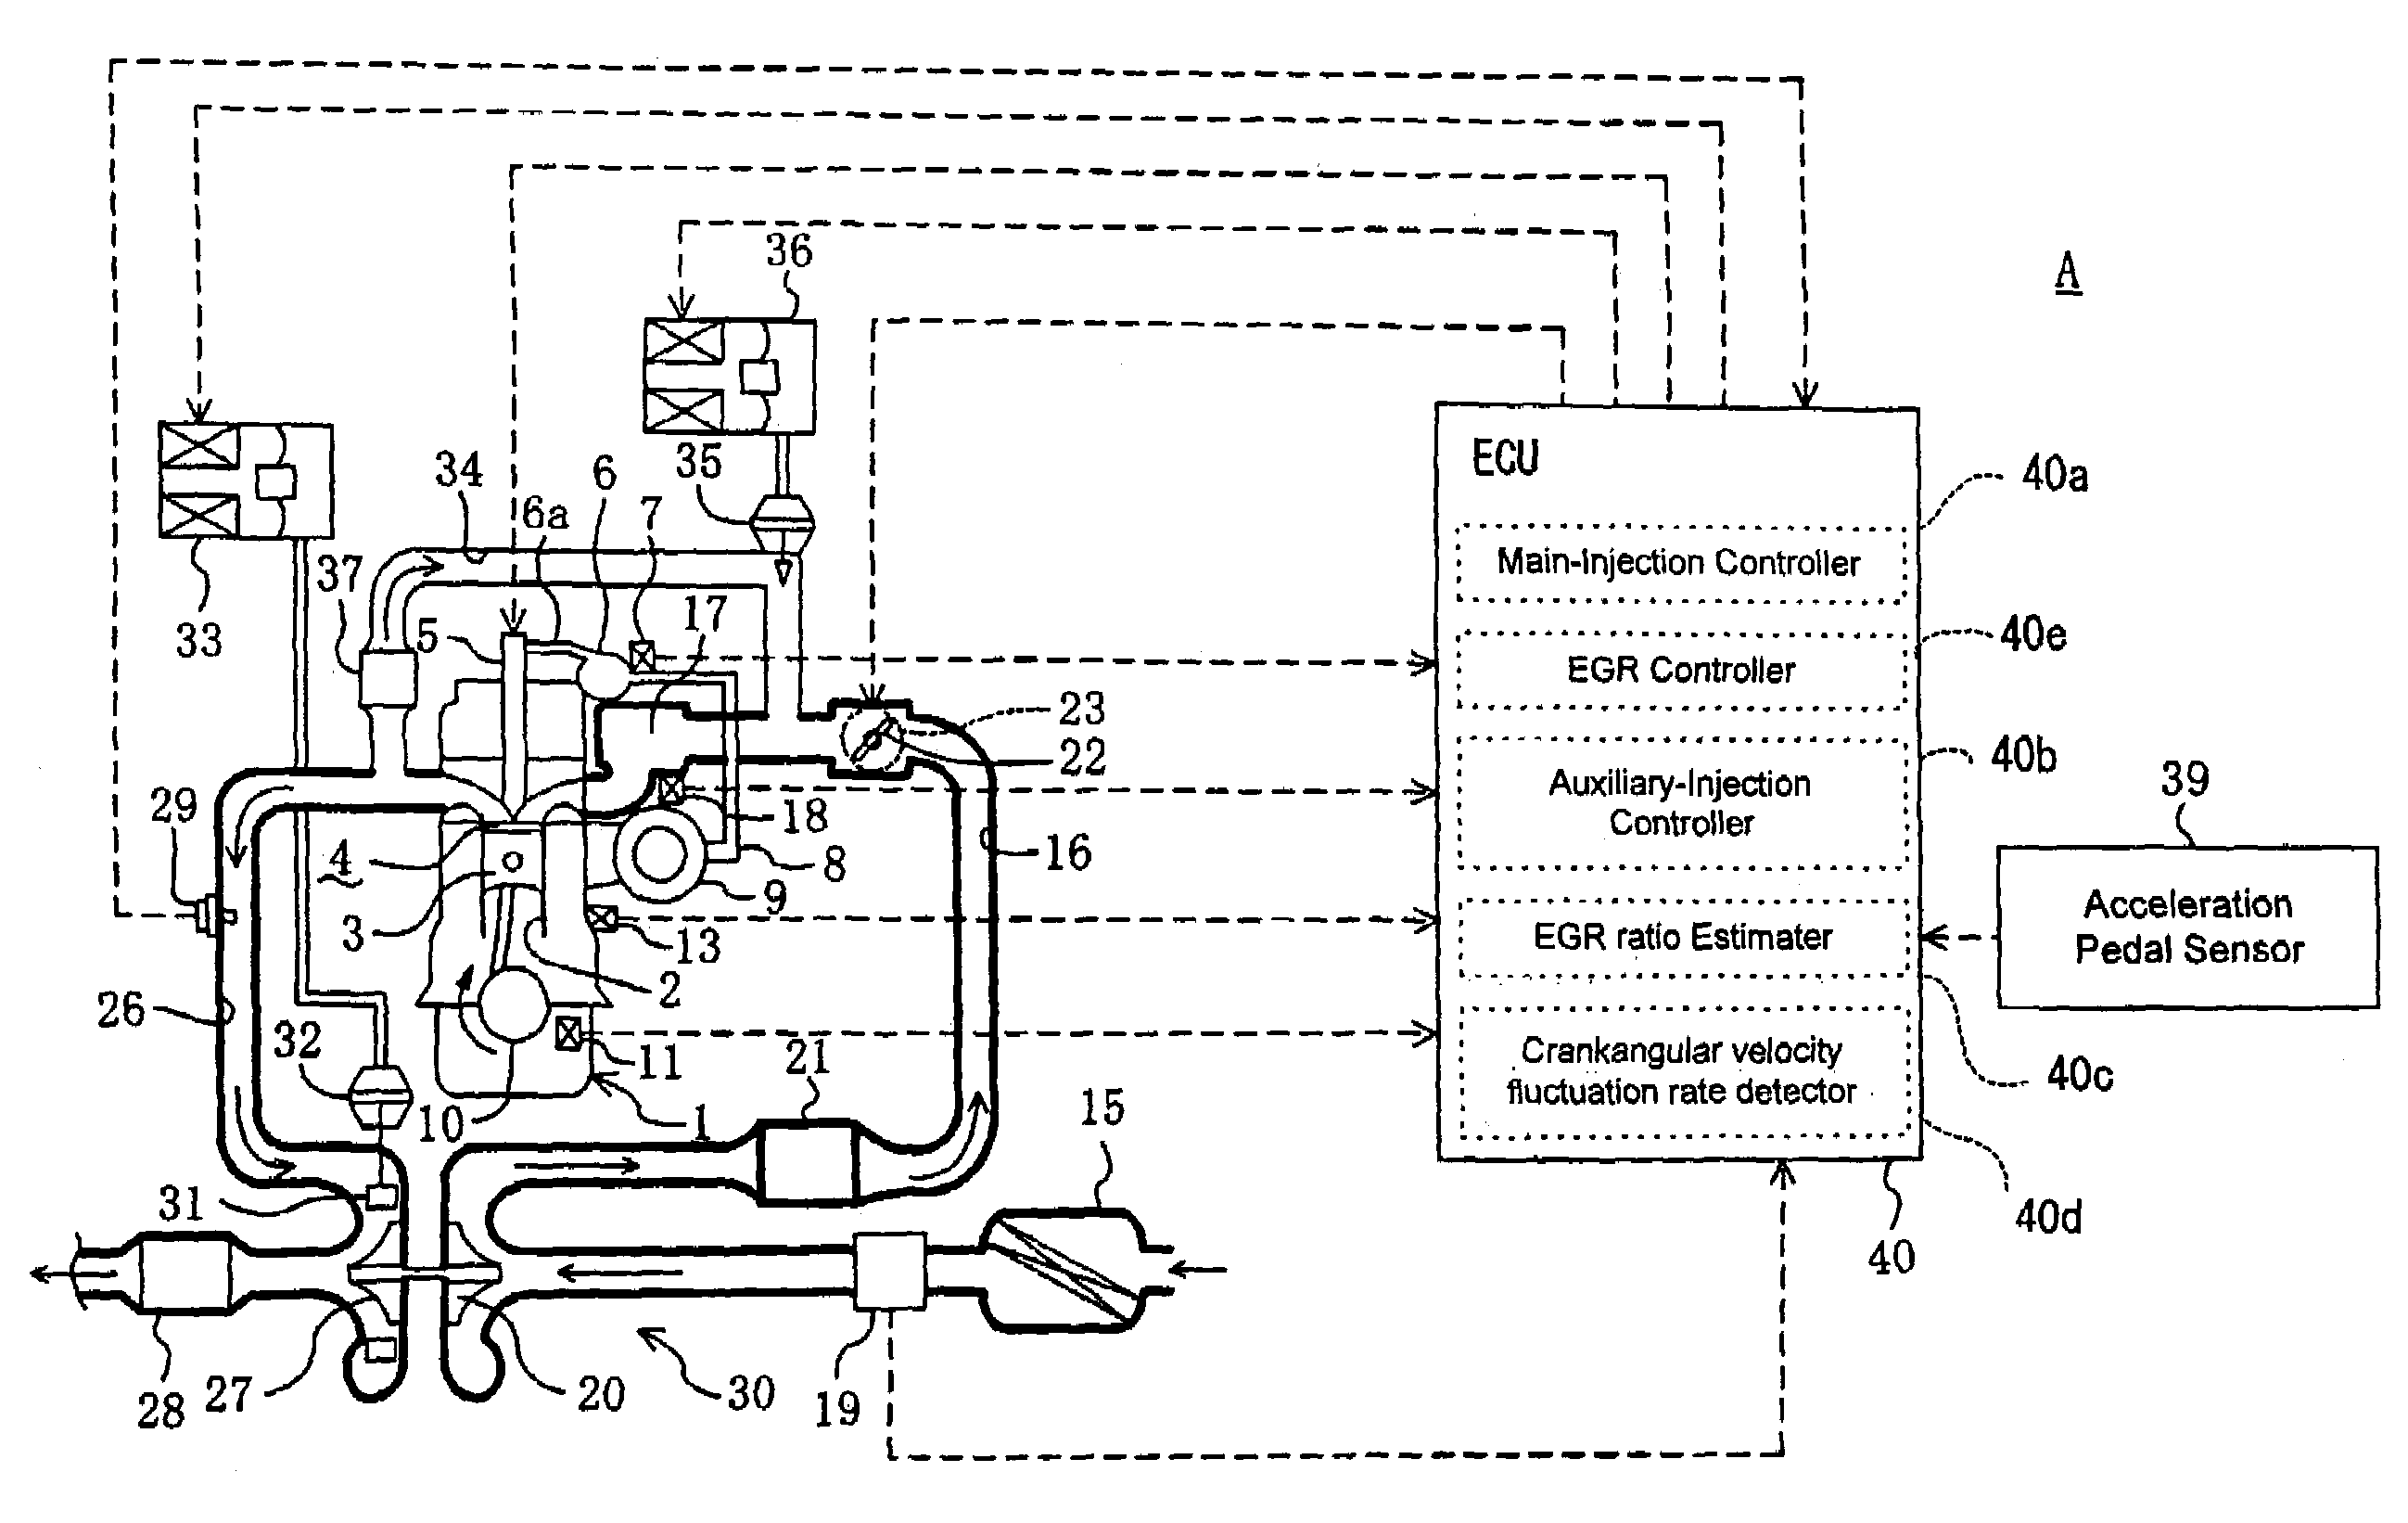 Combustion control apparatus for an engine